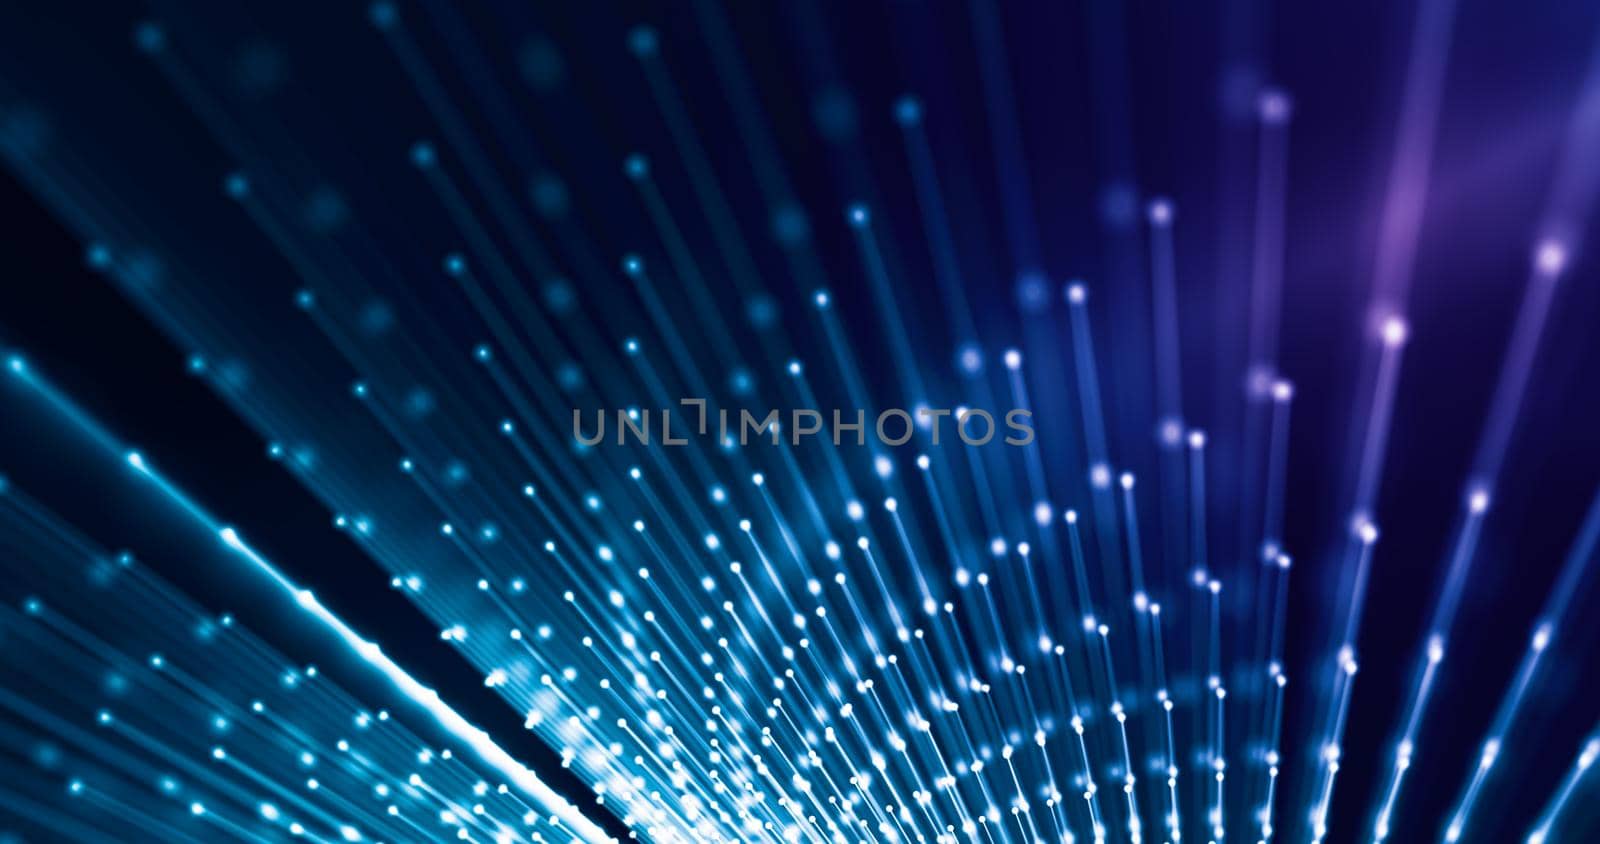 Connection dots and line, tech background in purple and blue. 3d rendering. by ImagesRouges